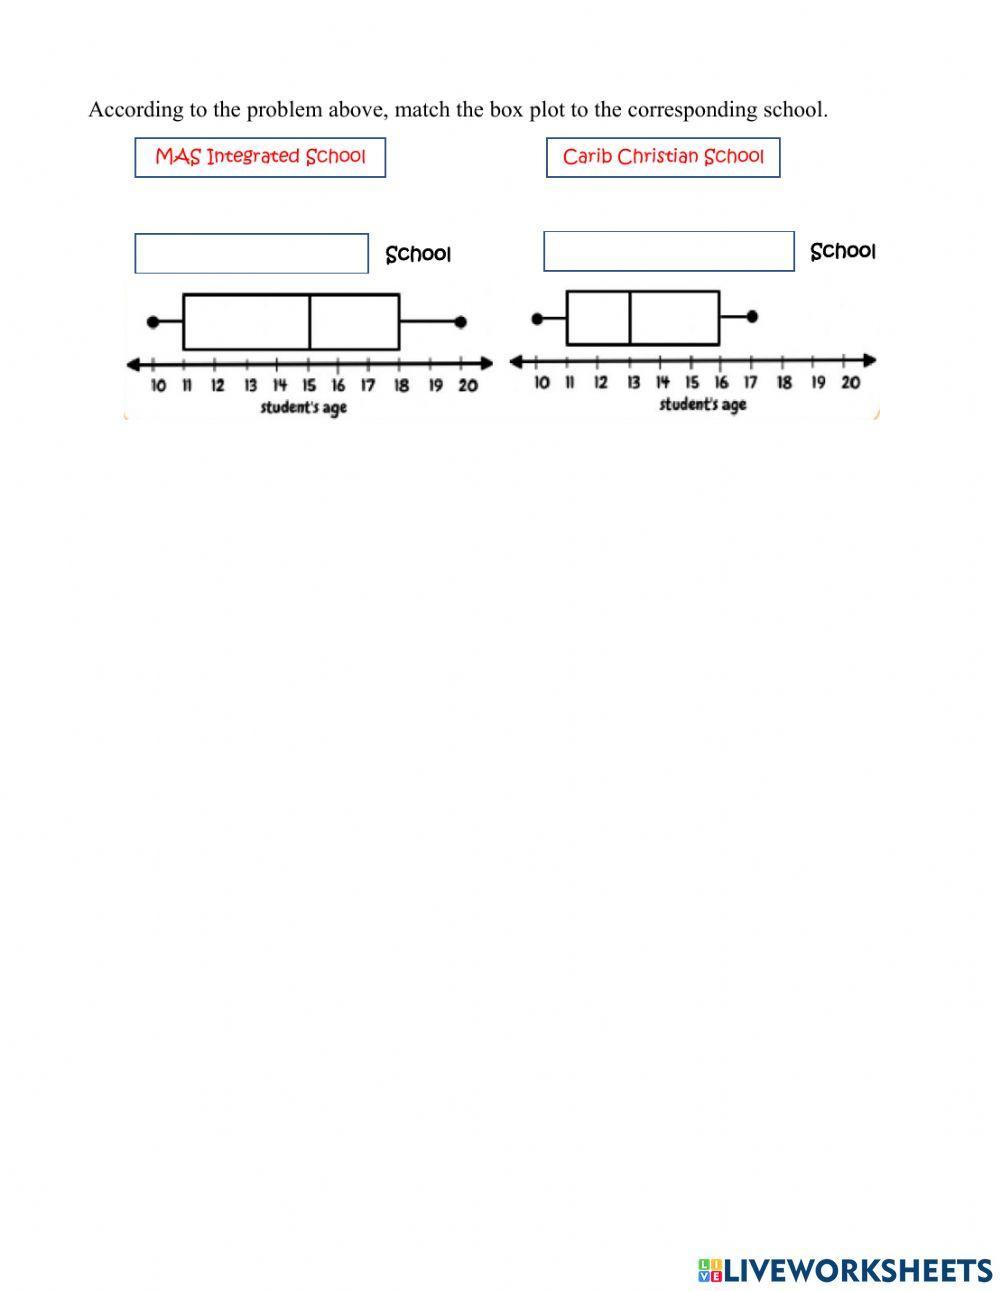 Comparing Data Displayed in Box Plots